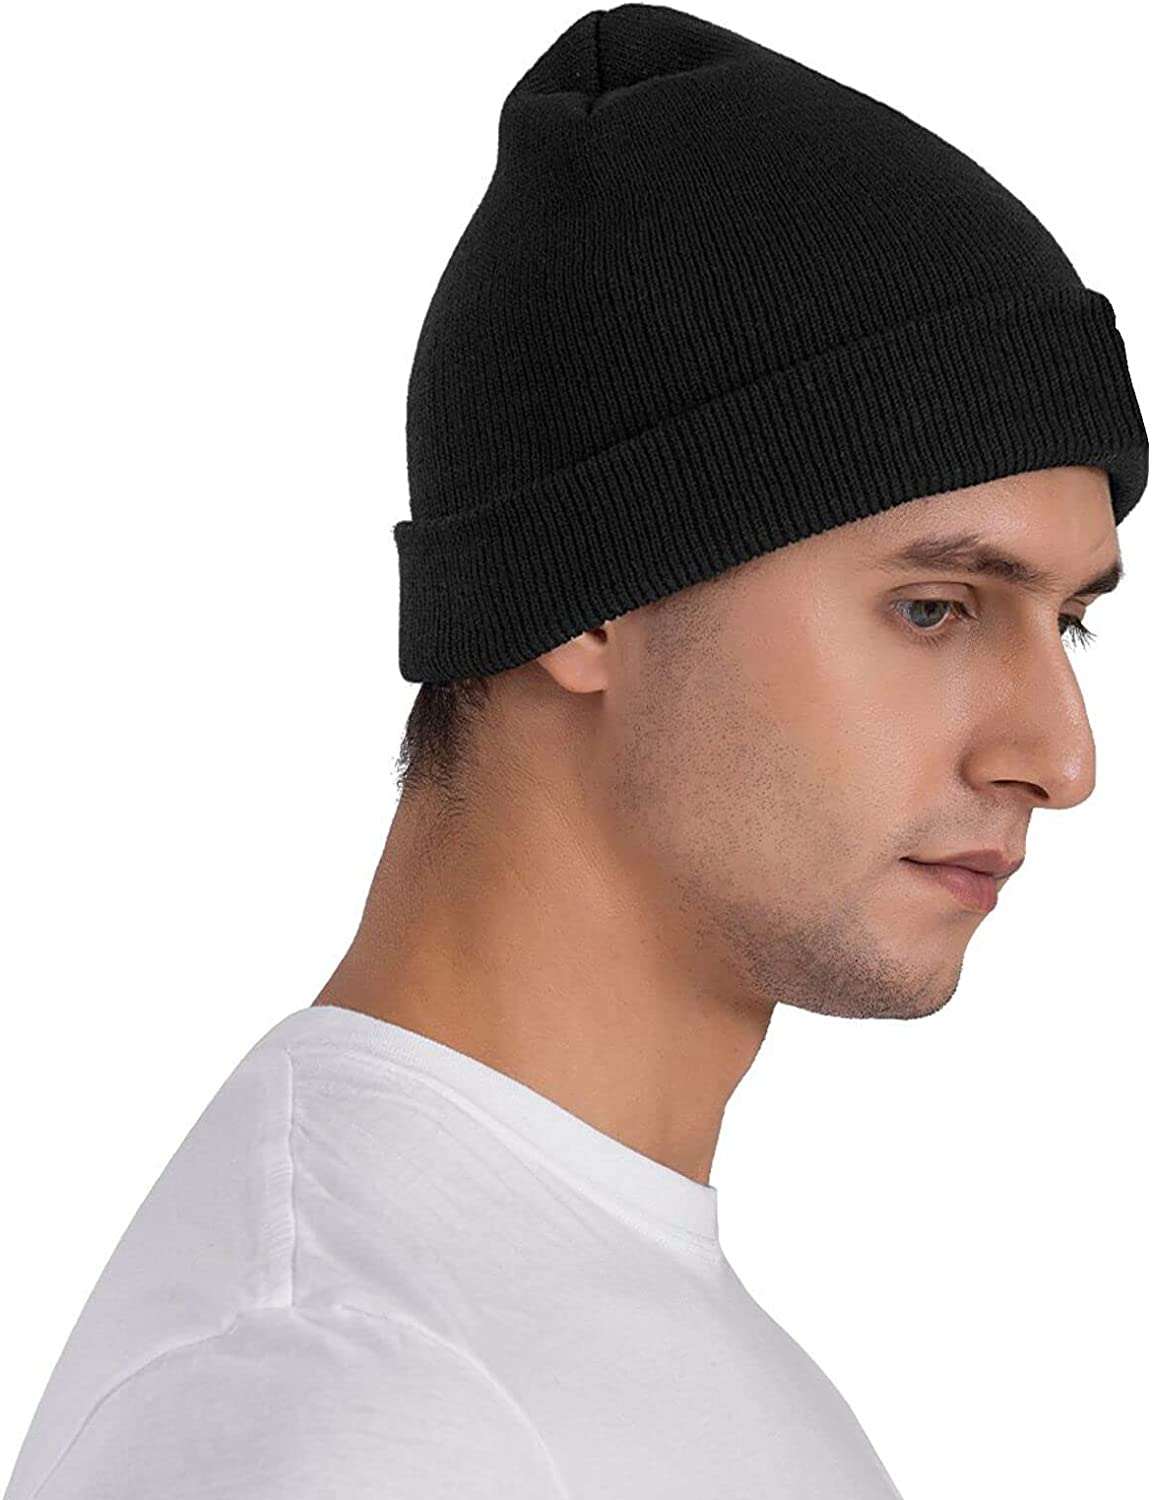 gogoherhome Suicide Logo Boys Knit Hats Beanie for Men Women Warm  Embroidered Soft Stretchy Toboggan Cap for Cold Weather Black | Beanies